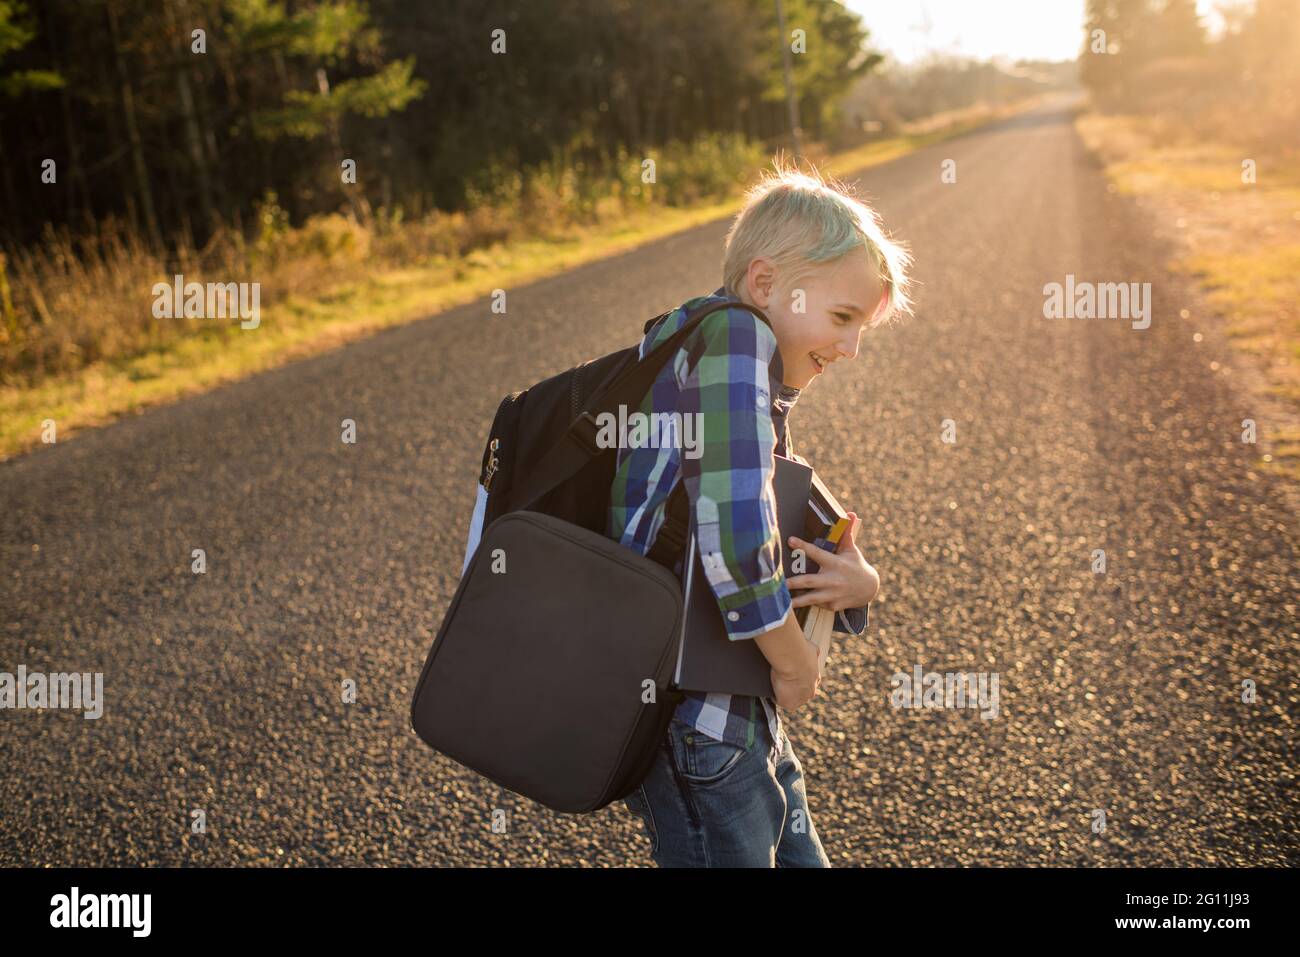 Canada, Ontario, Smiling boy with books on rural road at sunset Stock Photo